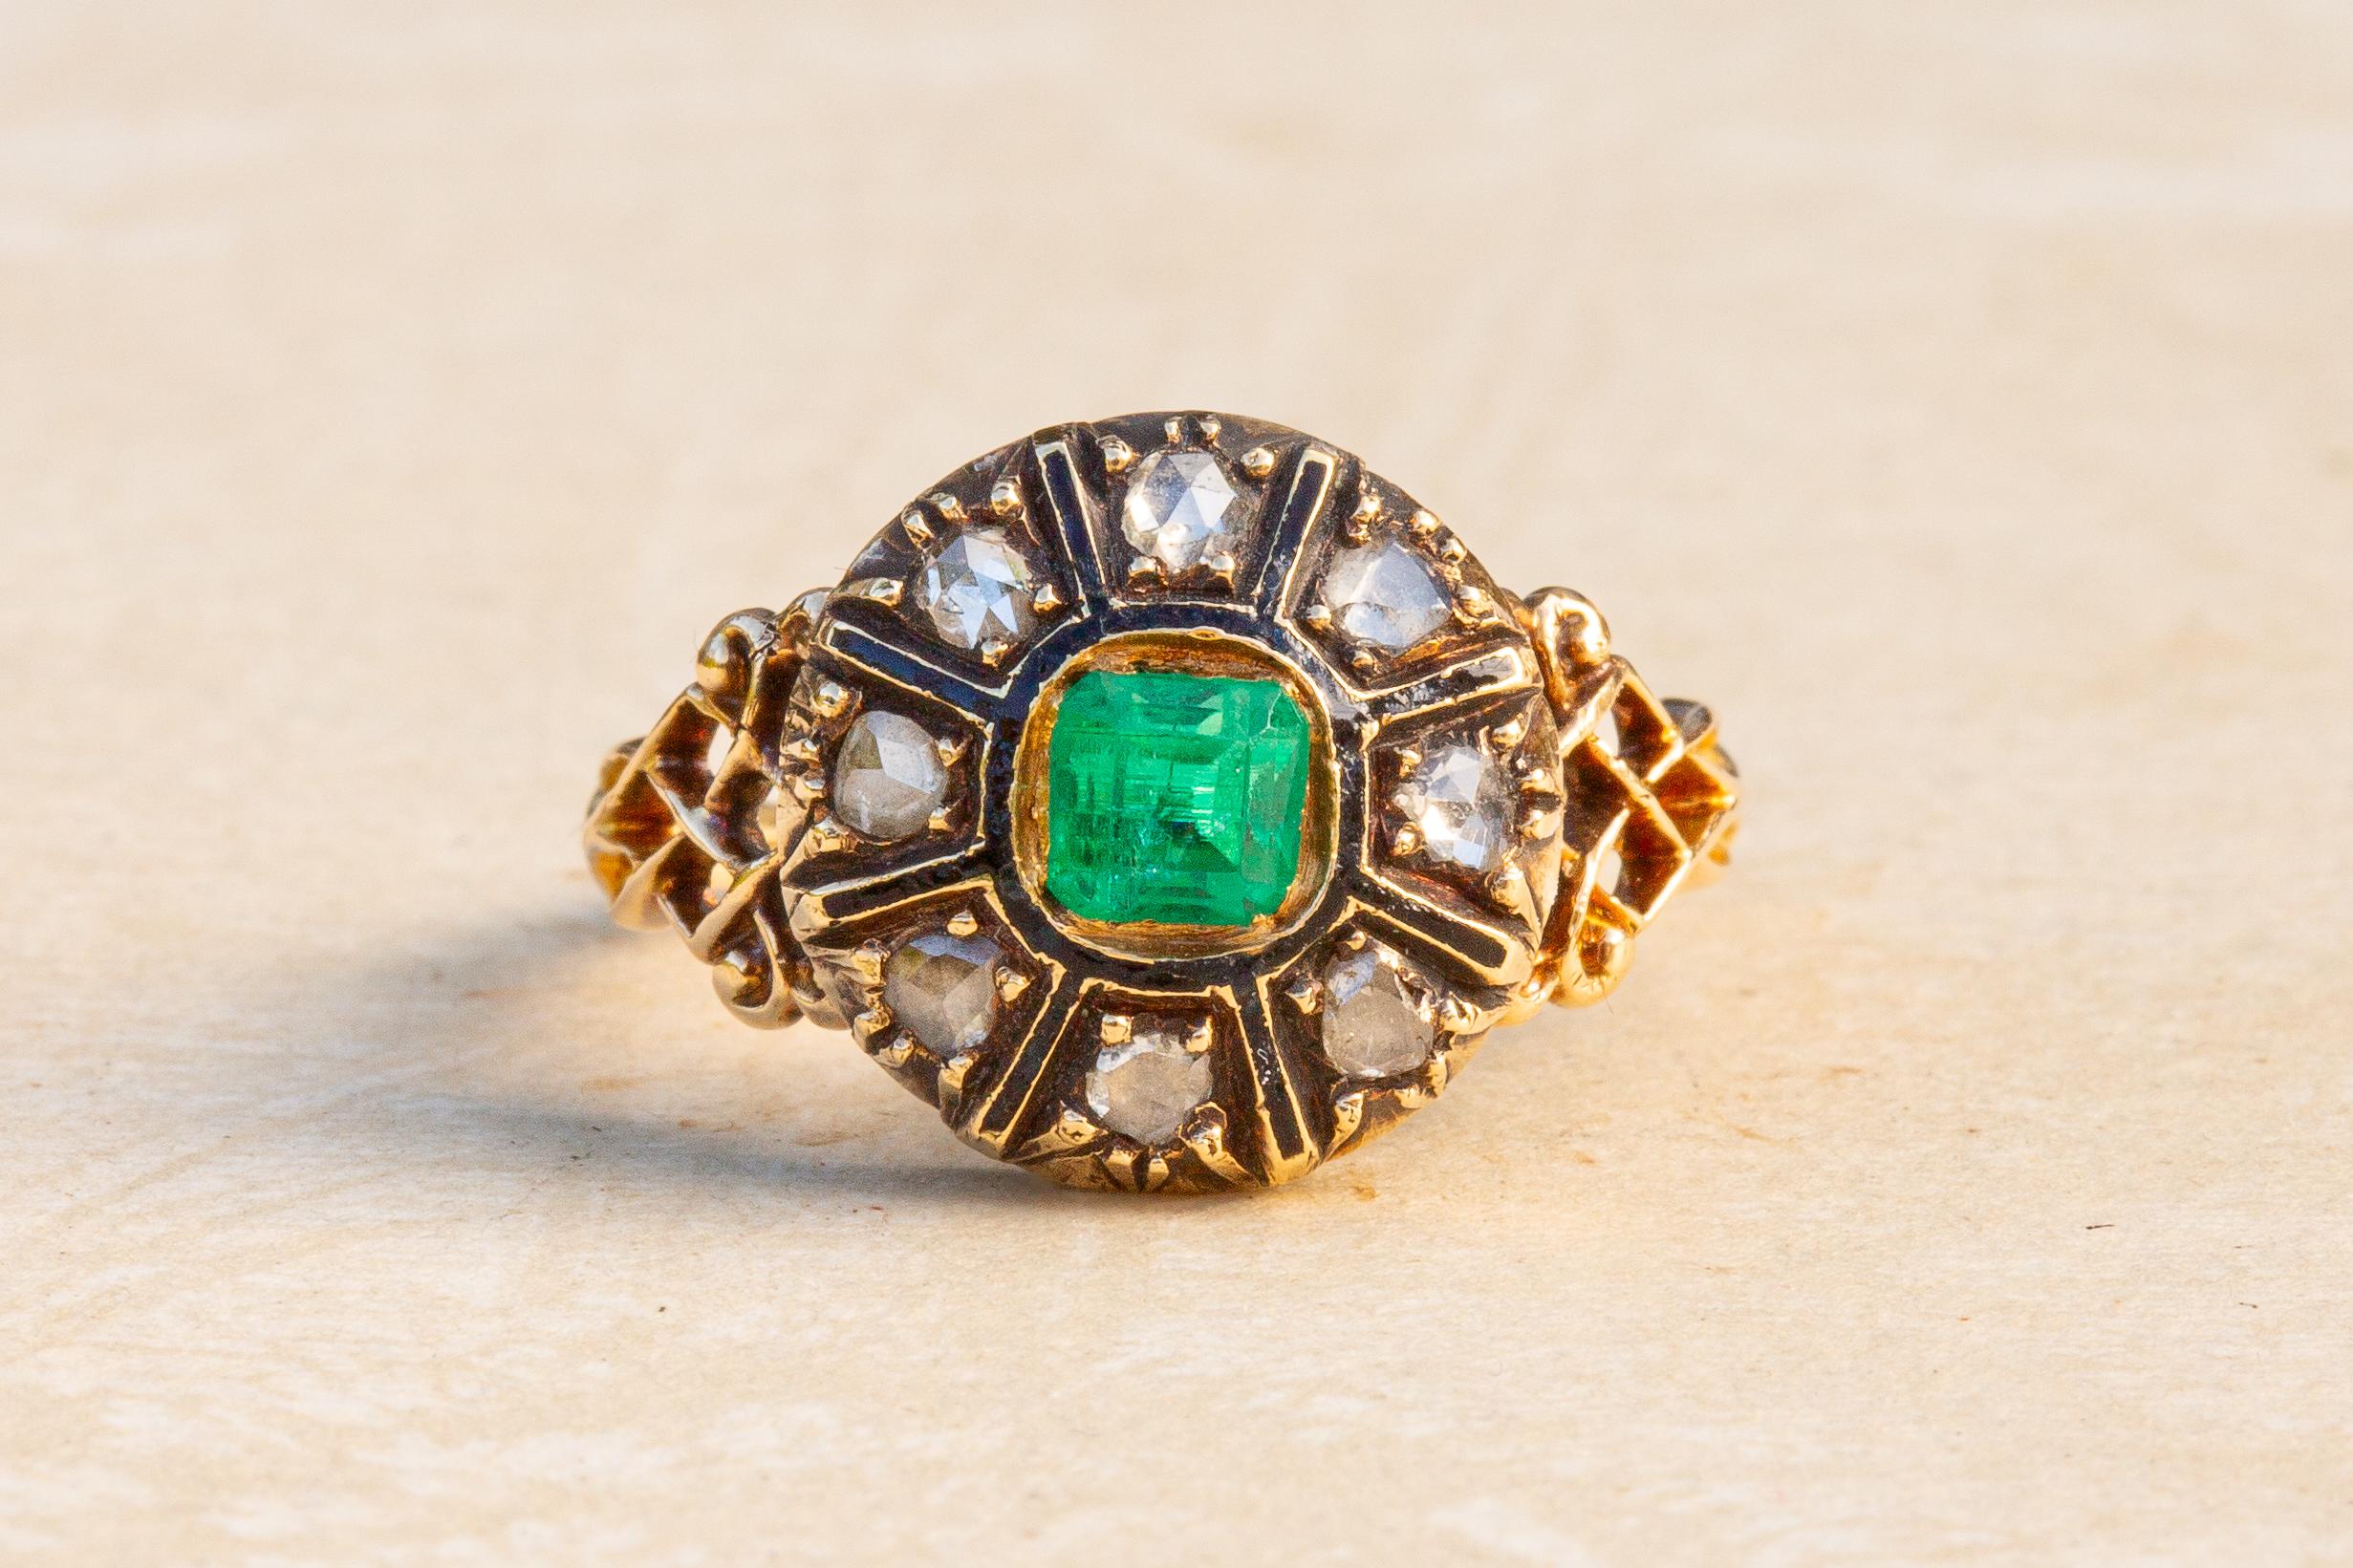 This striking antique gold cluster ring dates to the mid-19th century. 

The ring is crafted in 18K gold with black enamel. In the centre rests a vibrant 0.44ct step cut emerald in an open-backed rubover setting. The stone is a wonderful vivid green